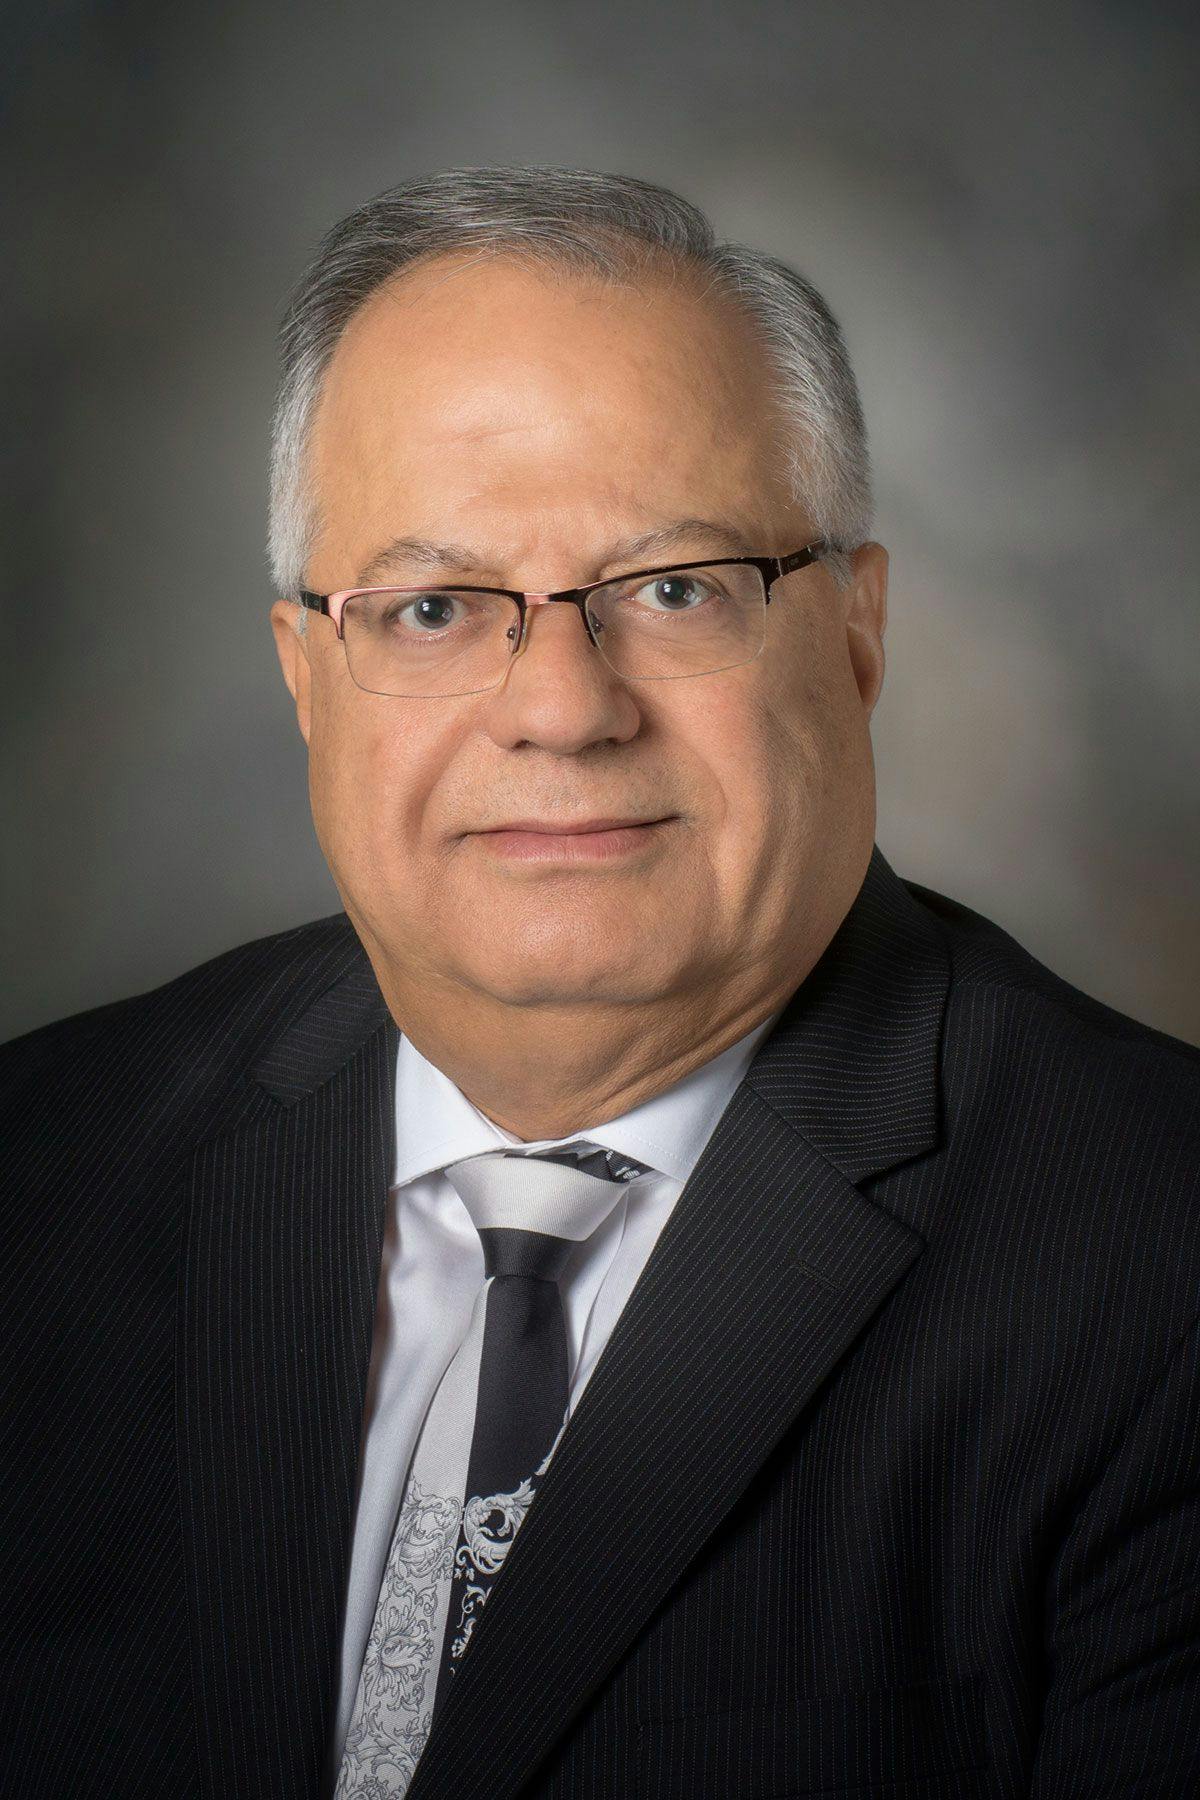 Nizar M. Tannir, MD (MODERATOR)

Professor

Ransom Horne Jr Professorship for Cancer Research

Department of Genitourinary

Medical Oncology

Division of Cancer Medicine

The University of Texas MD Anderson Cancer Center

Houston, TX